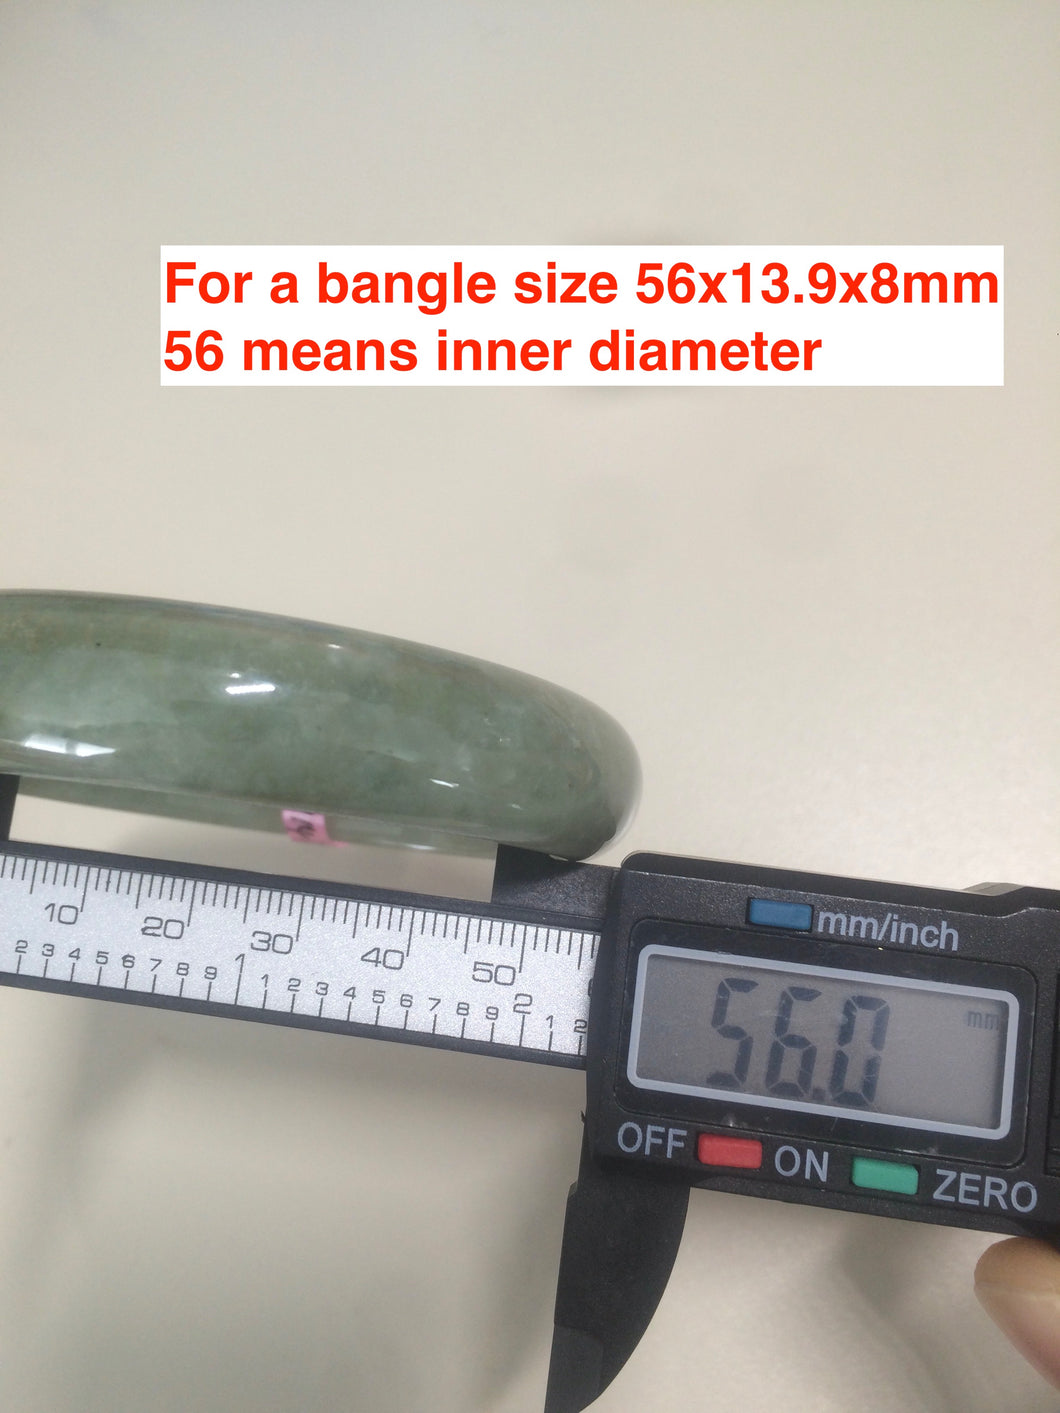 How to read the size for a bangle